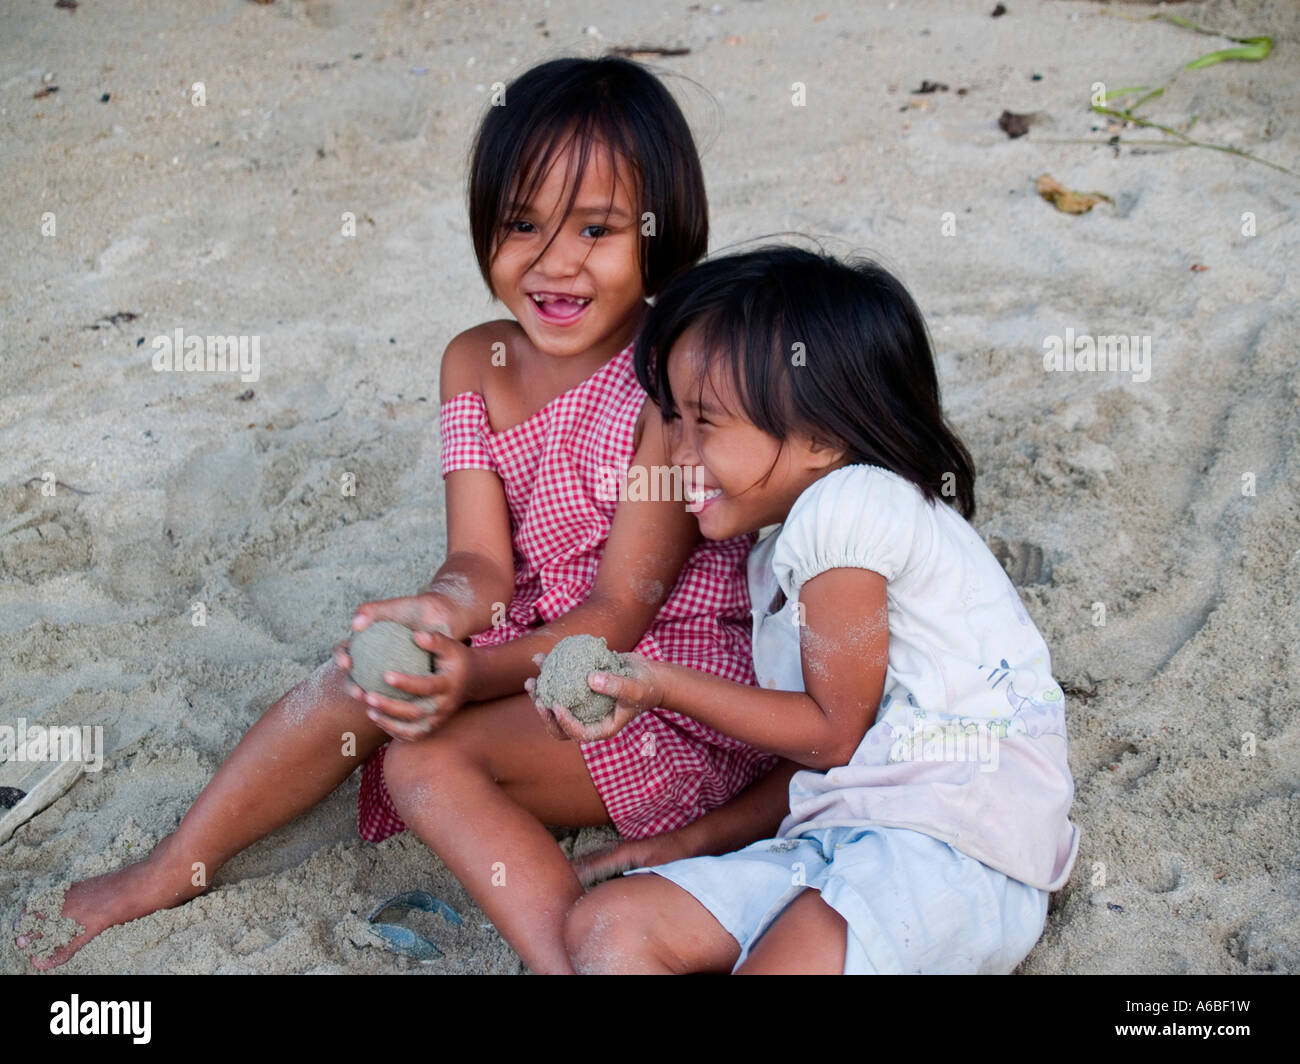 beach play 2 giggling girls on the beach in El Nido Palawan Philippines ...